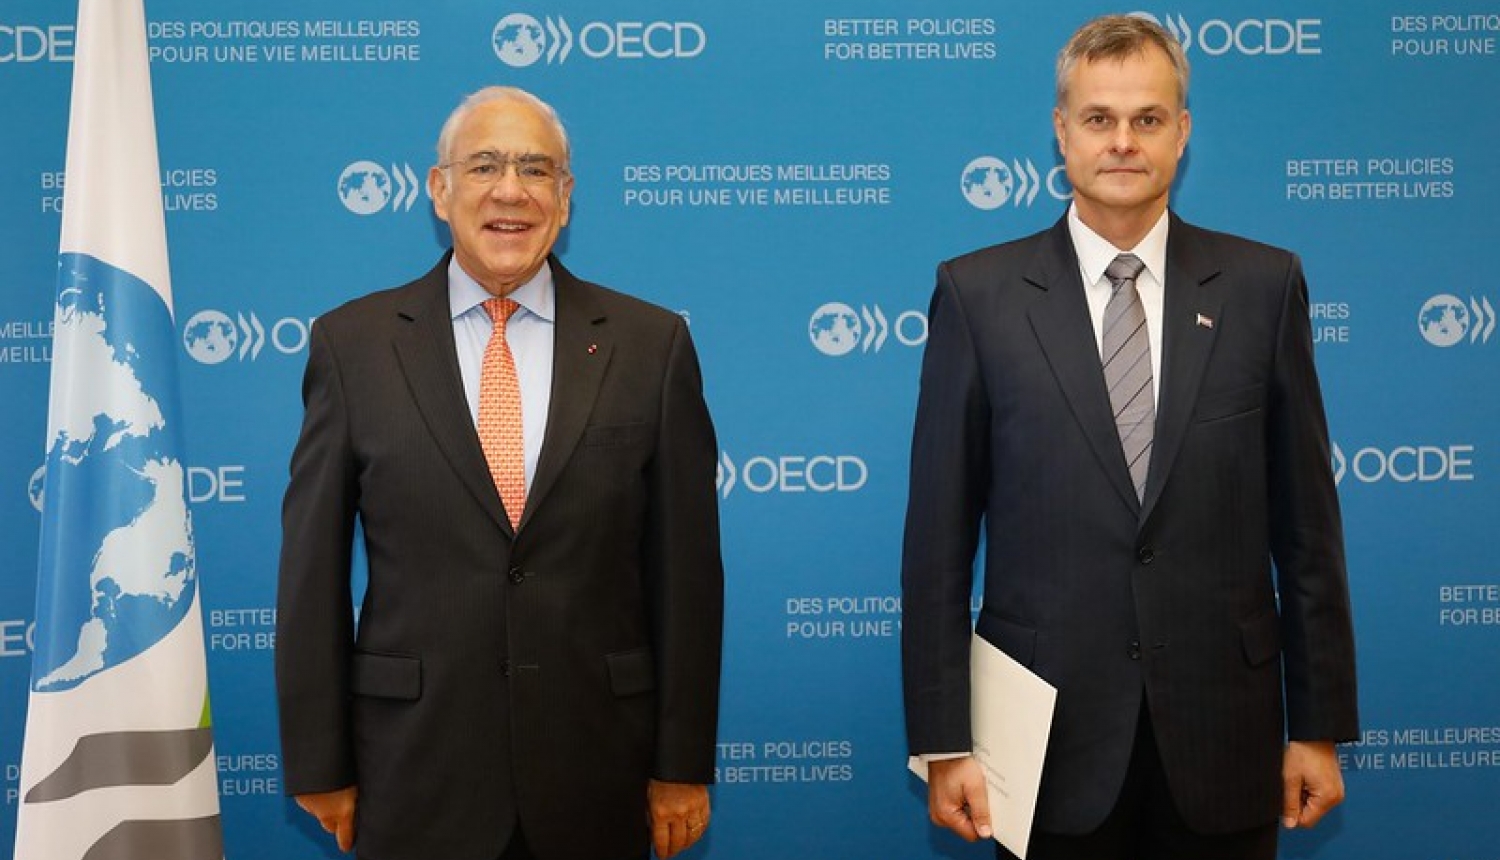 Latvia’s Ambassador to the OECD, Indulis Ābelis, presents his letter of credence to Secretary-General Angel Gurría